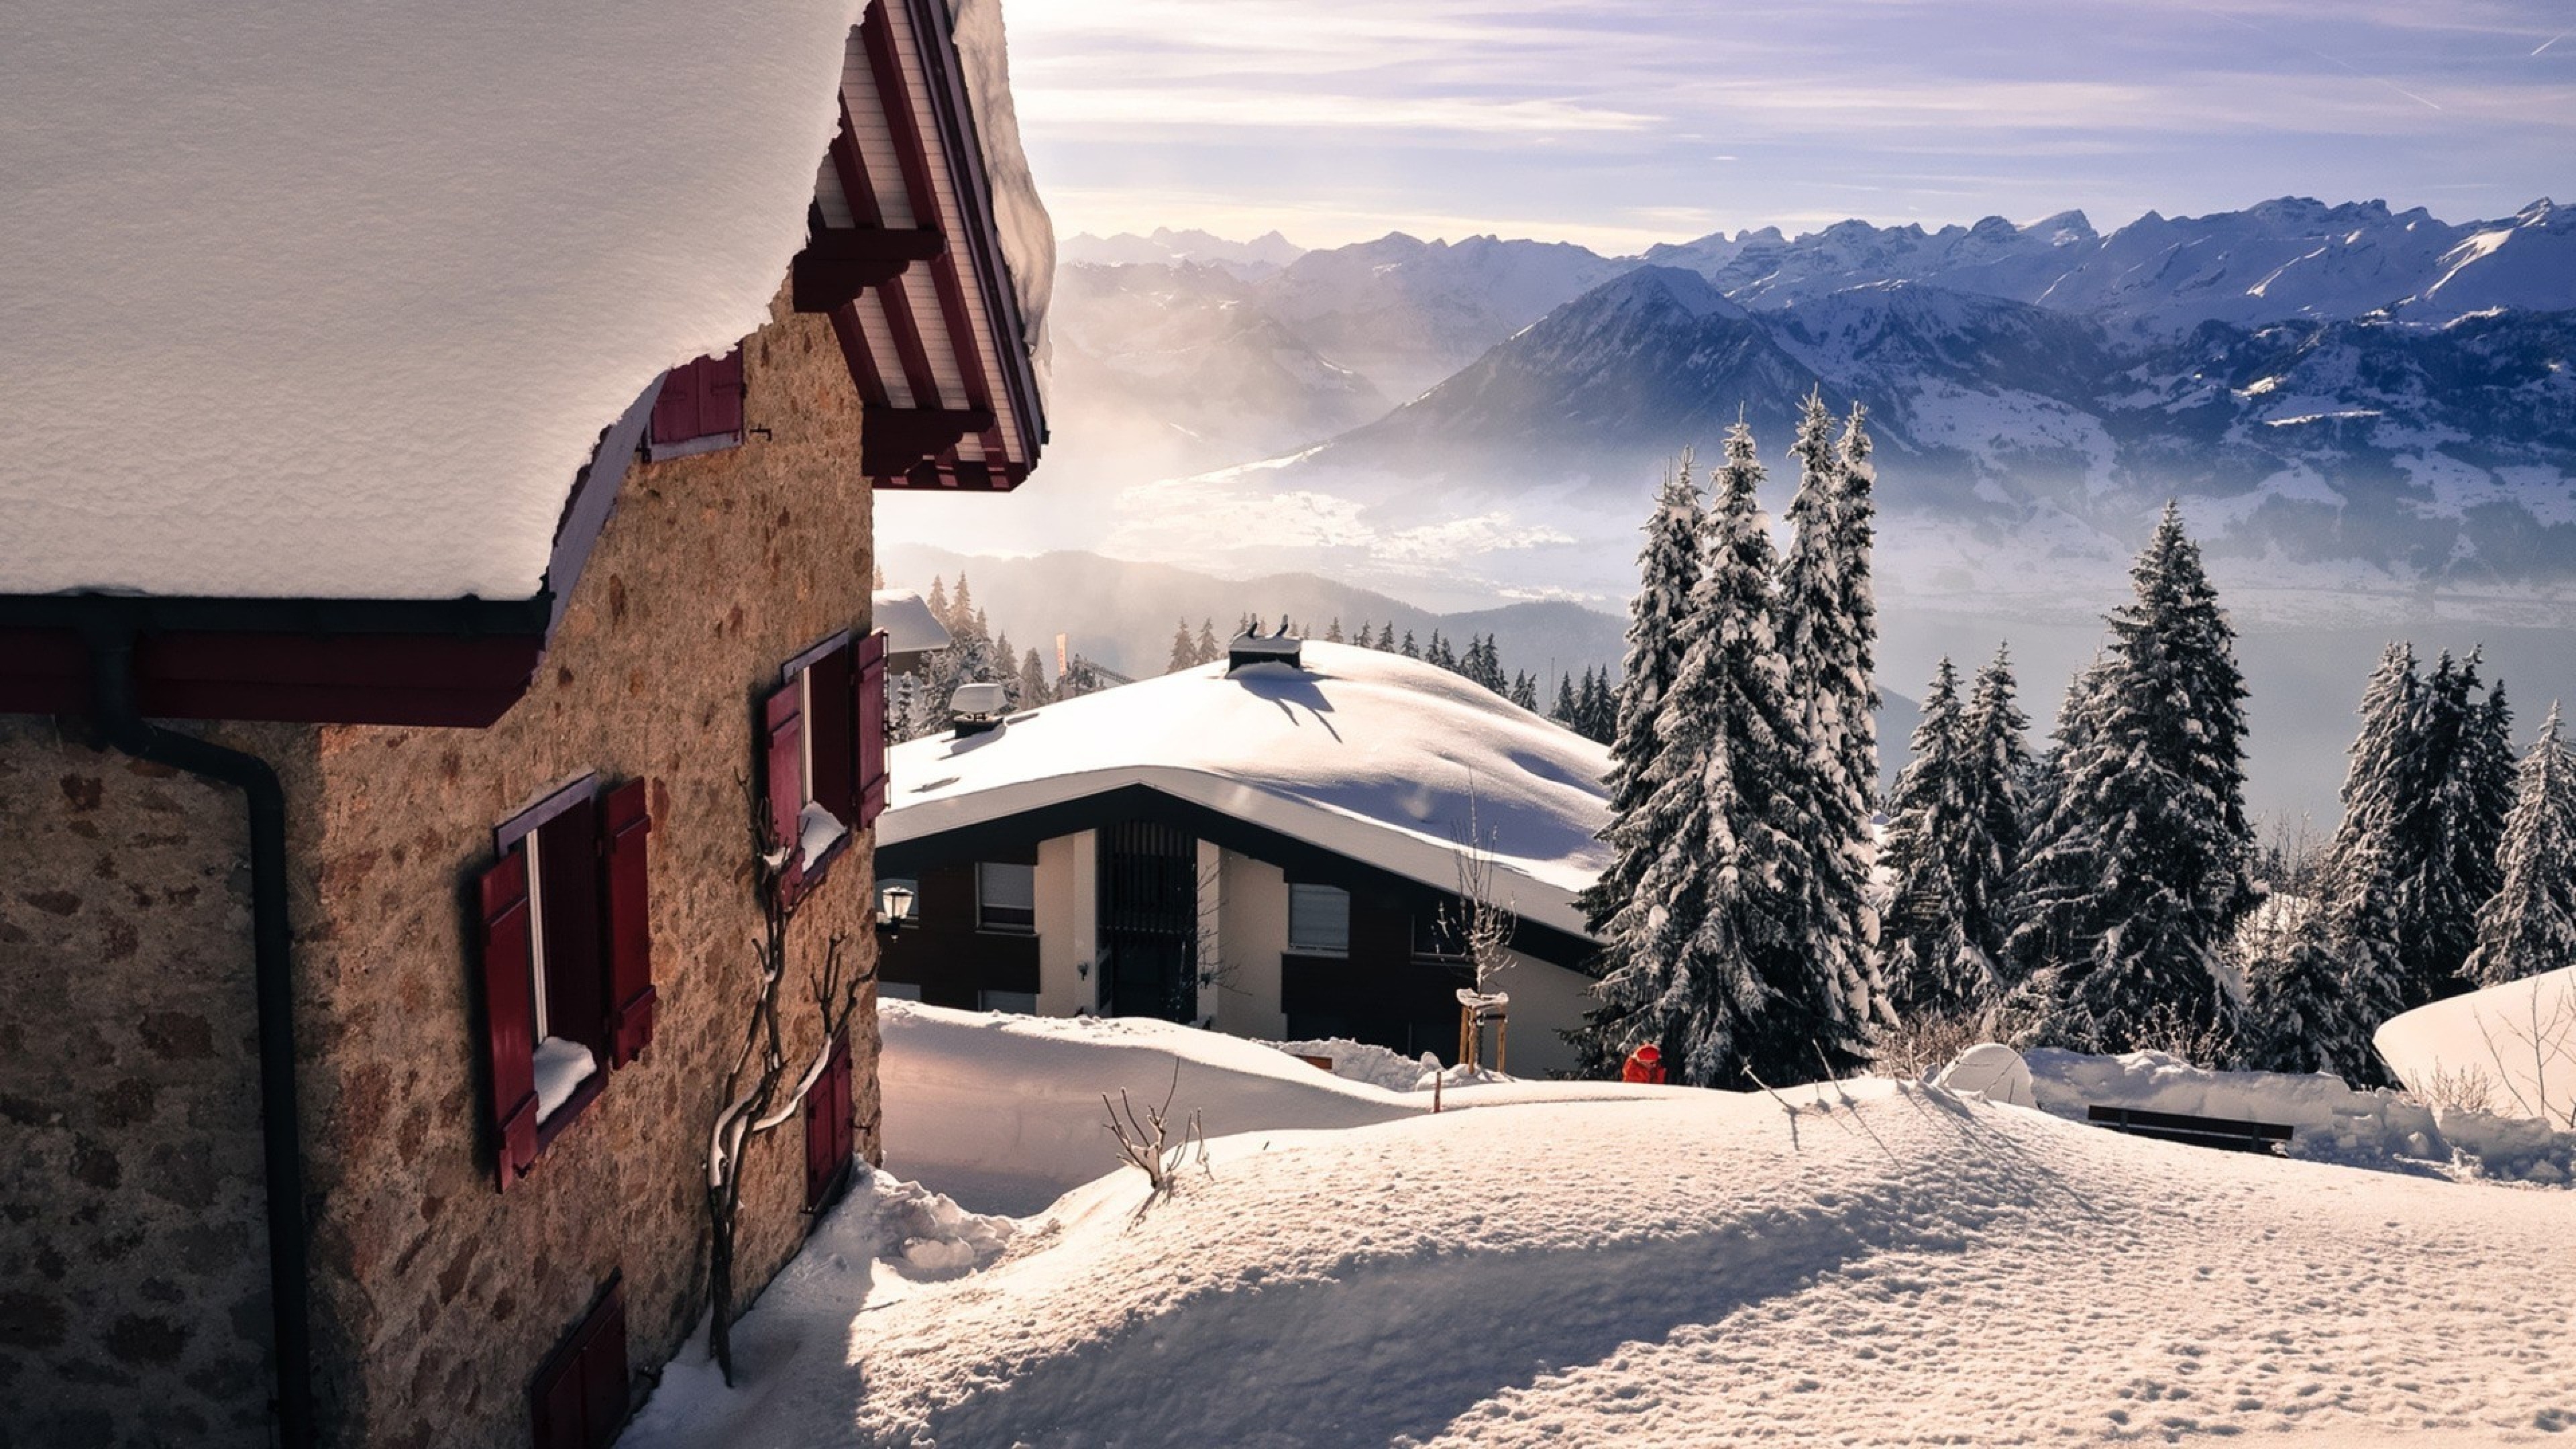 Snow Mountains Winter Wallpaper Hd - House In Snowy Mountains , HD Wallpaper & Backgrounds